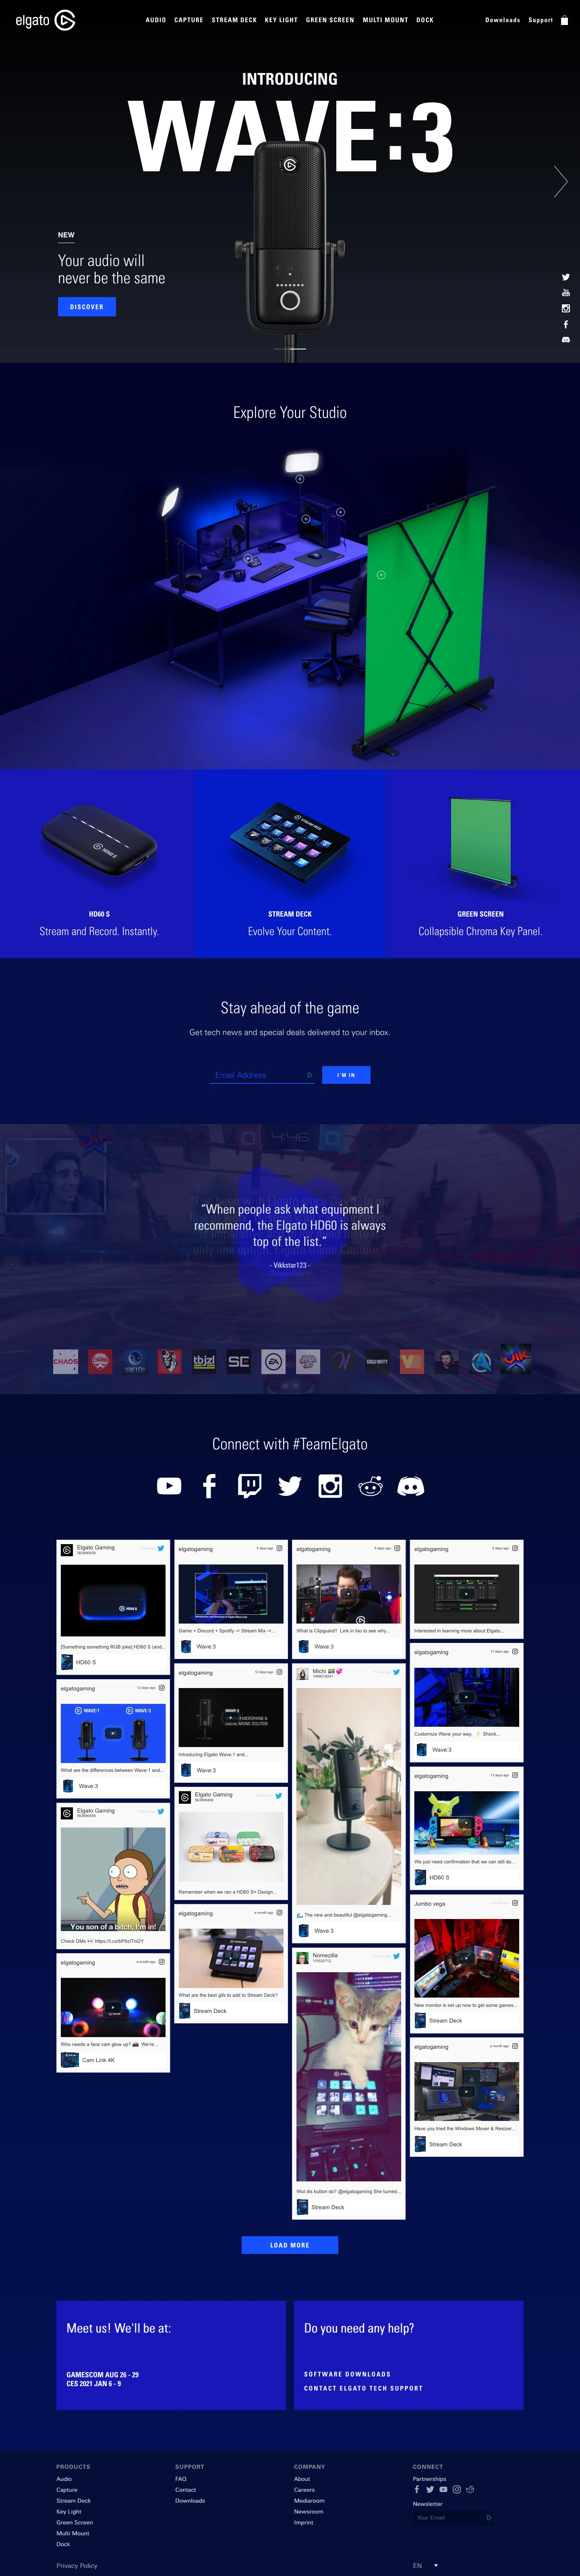 Elgato Landing Page Example: Elgato is the leading provider of hardware and software for content creators, leveraging decades of experience to develop widely-accessible products that empower all creators to produce high-quality, professional content.